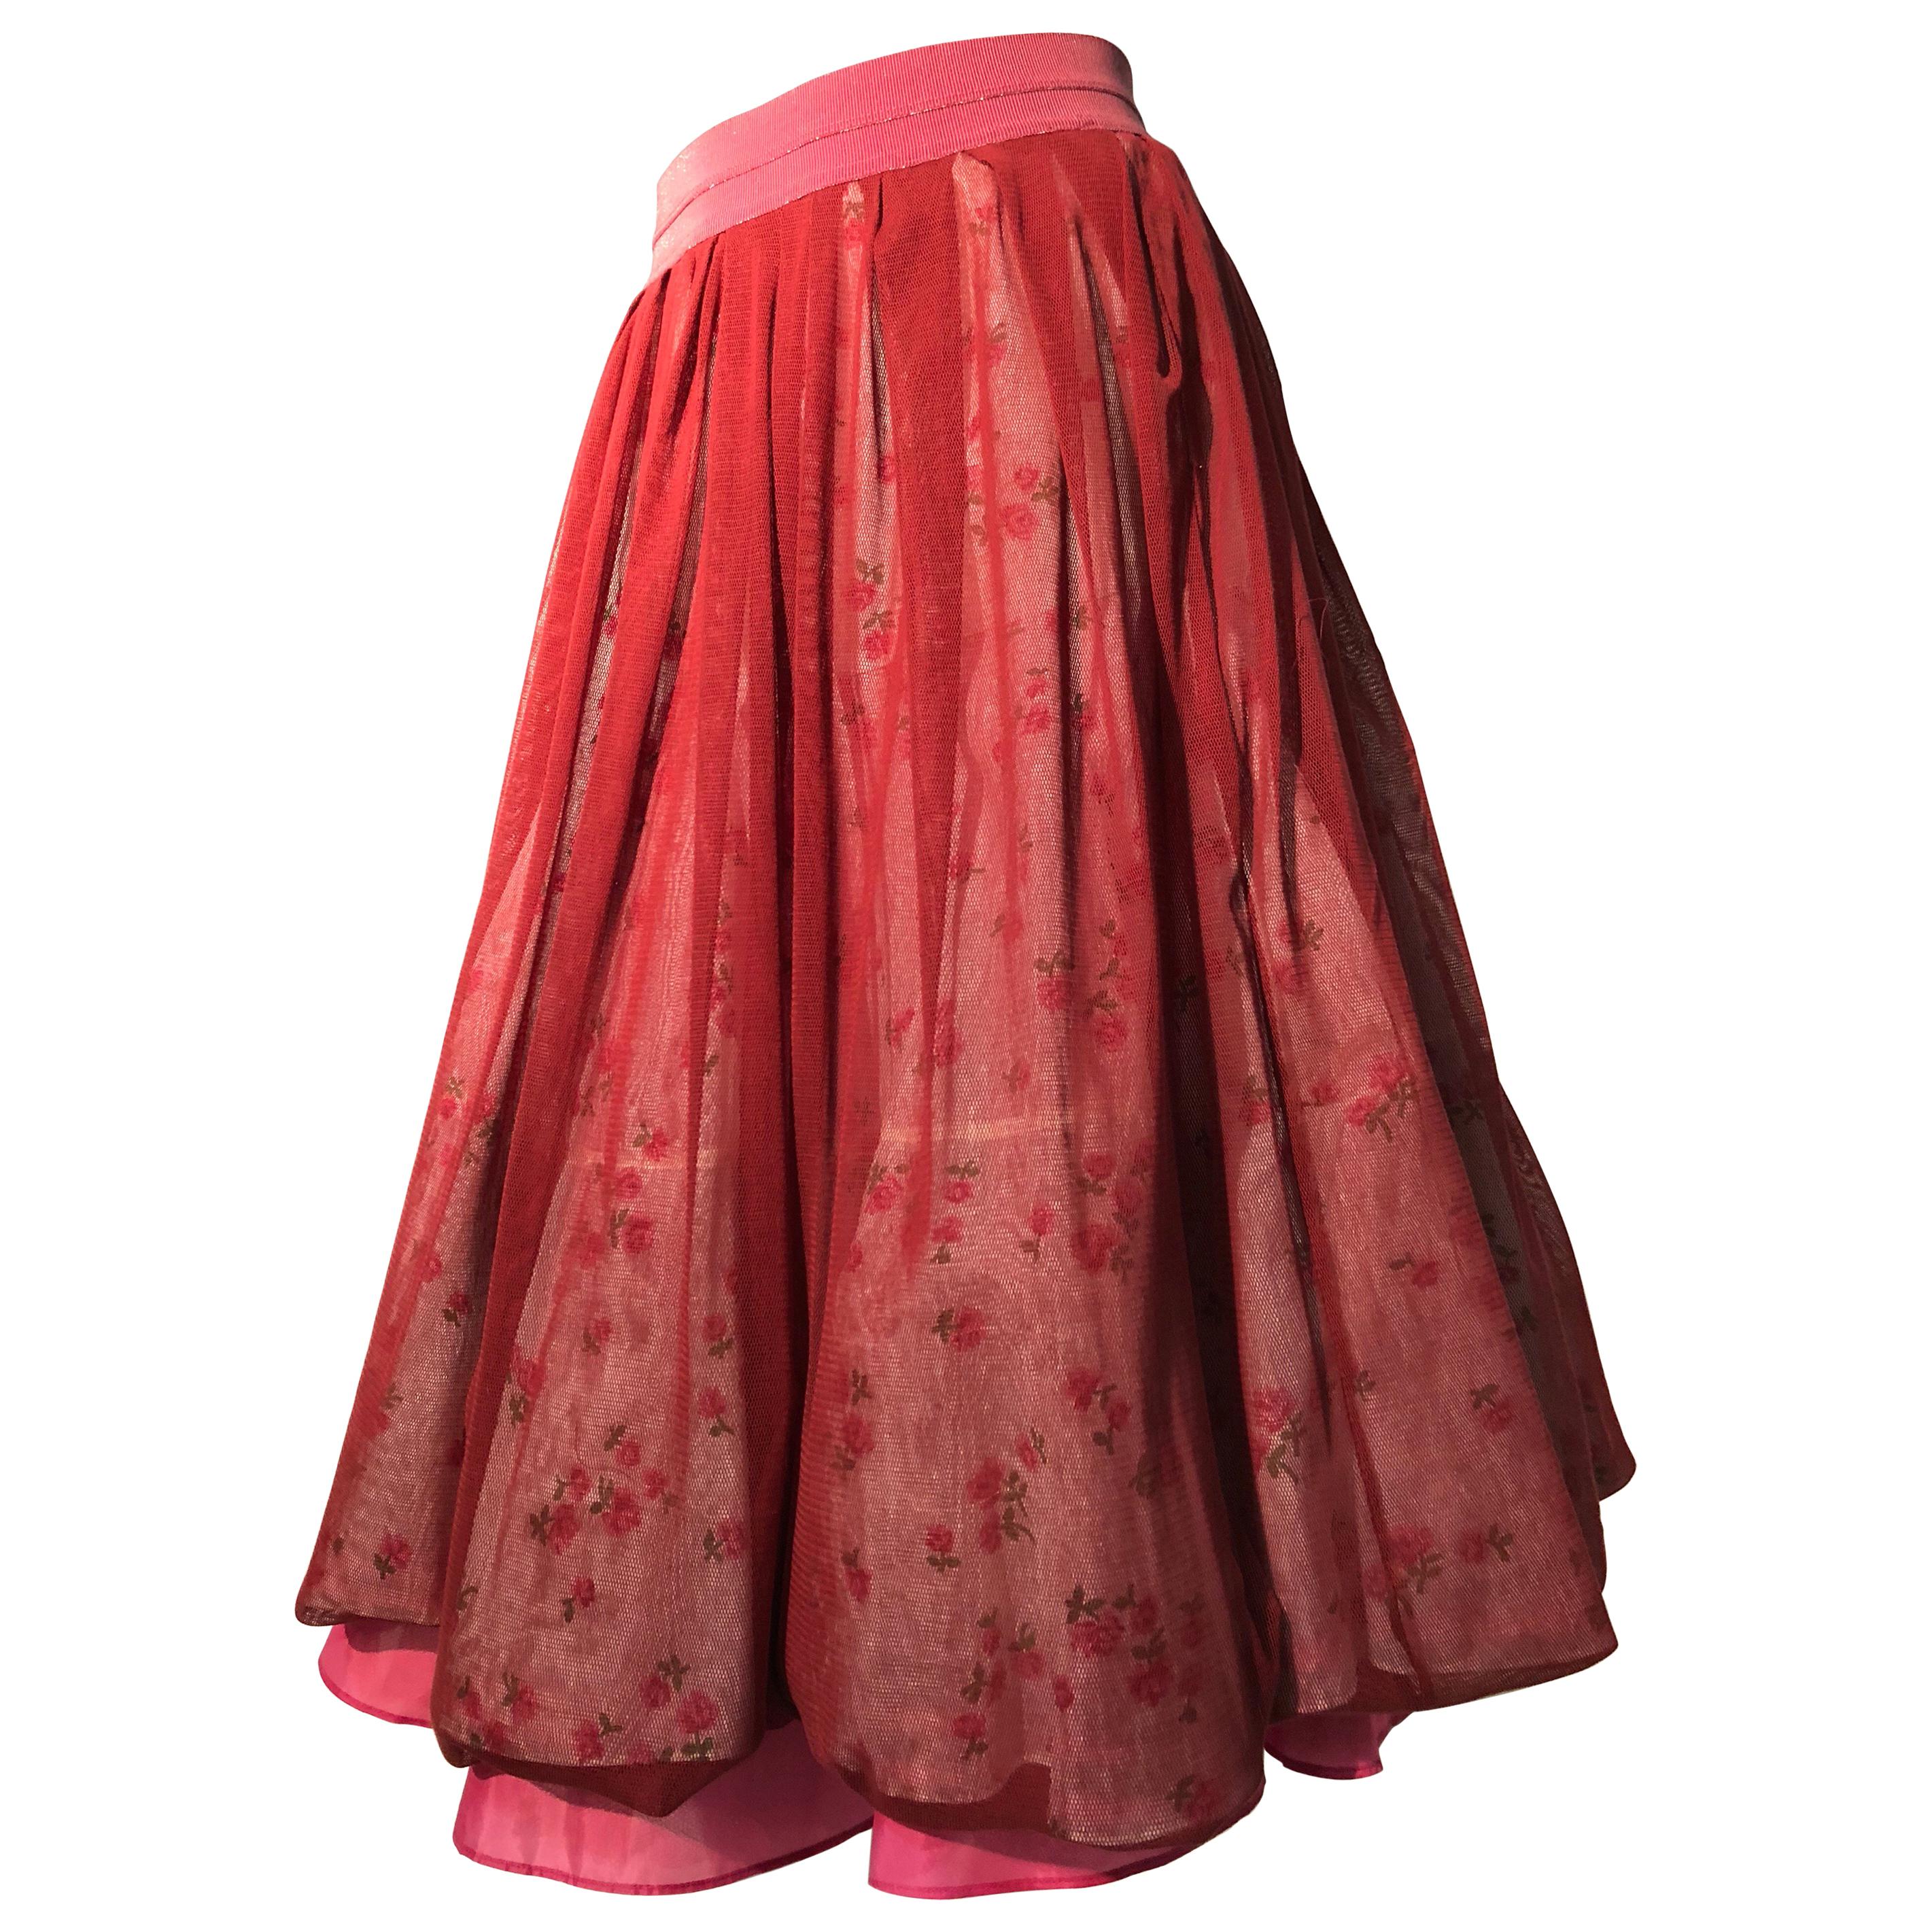 Torso Creations Reconstructed Multi-Layered Petticoat Skirt In Burgundy & Floral